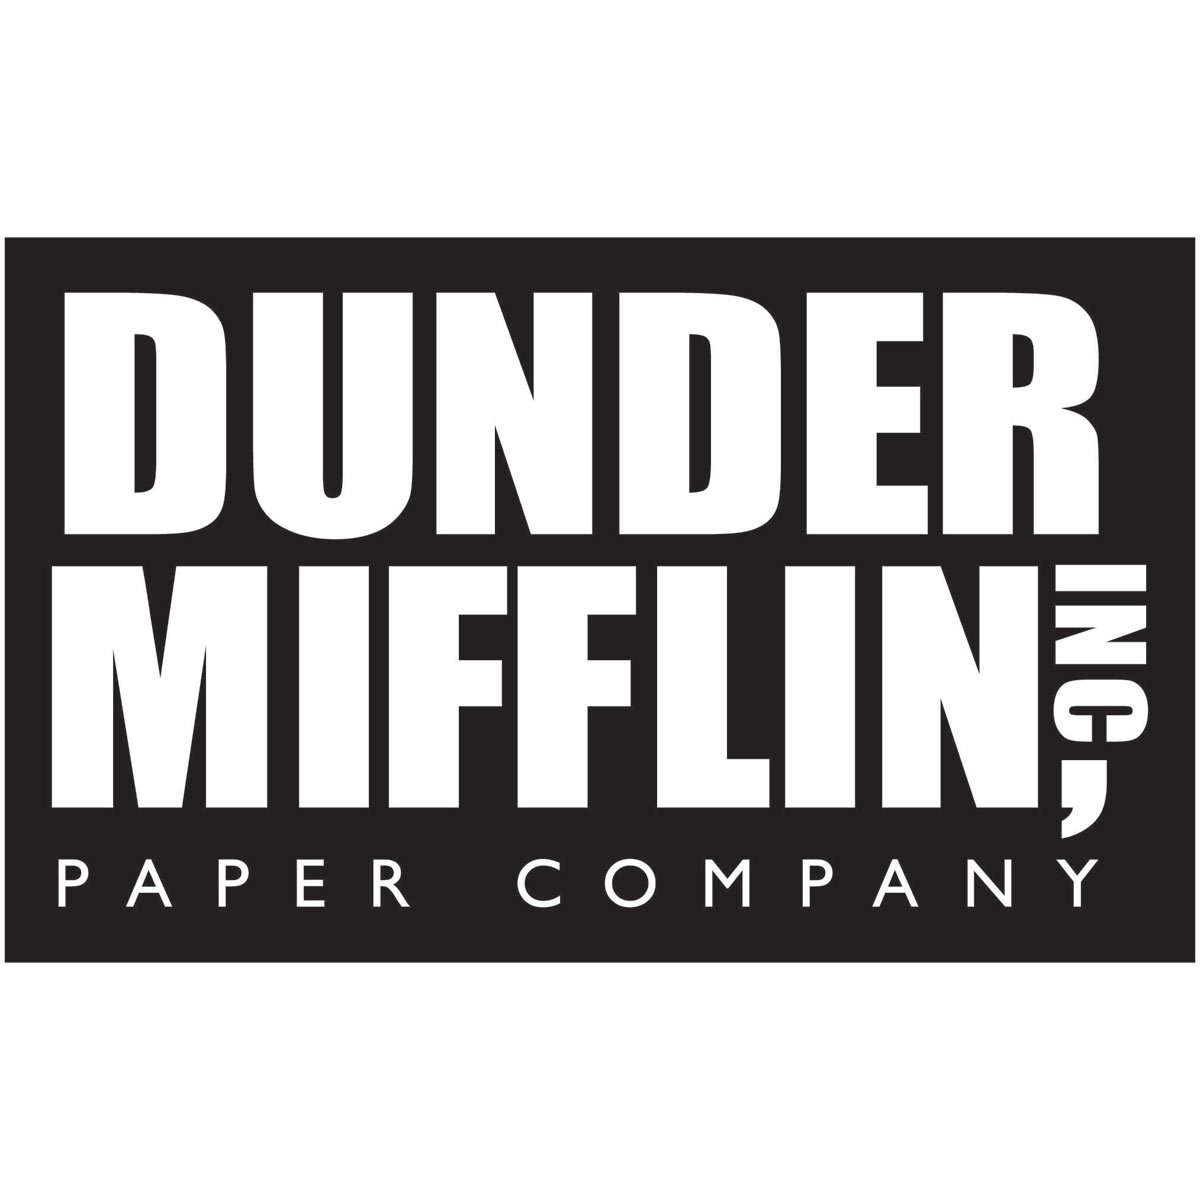 The Office Dunder Mifflin Patch - Entertainment Earth